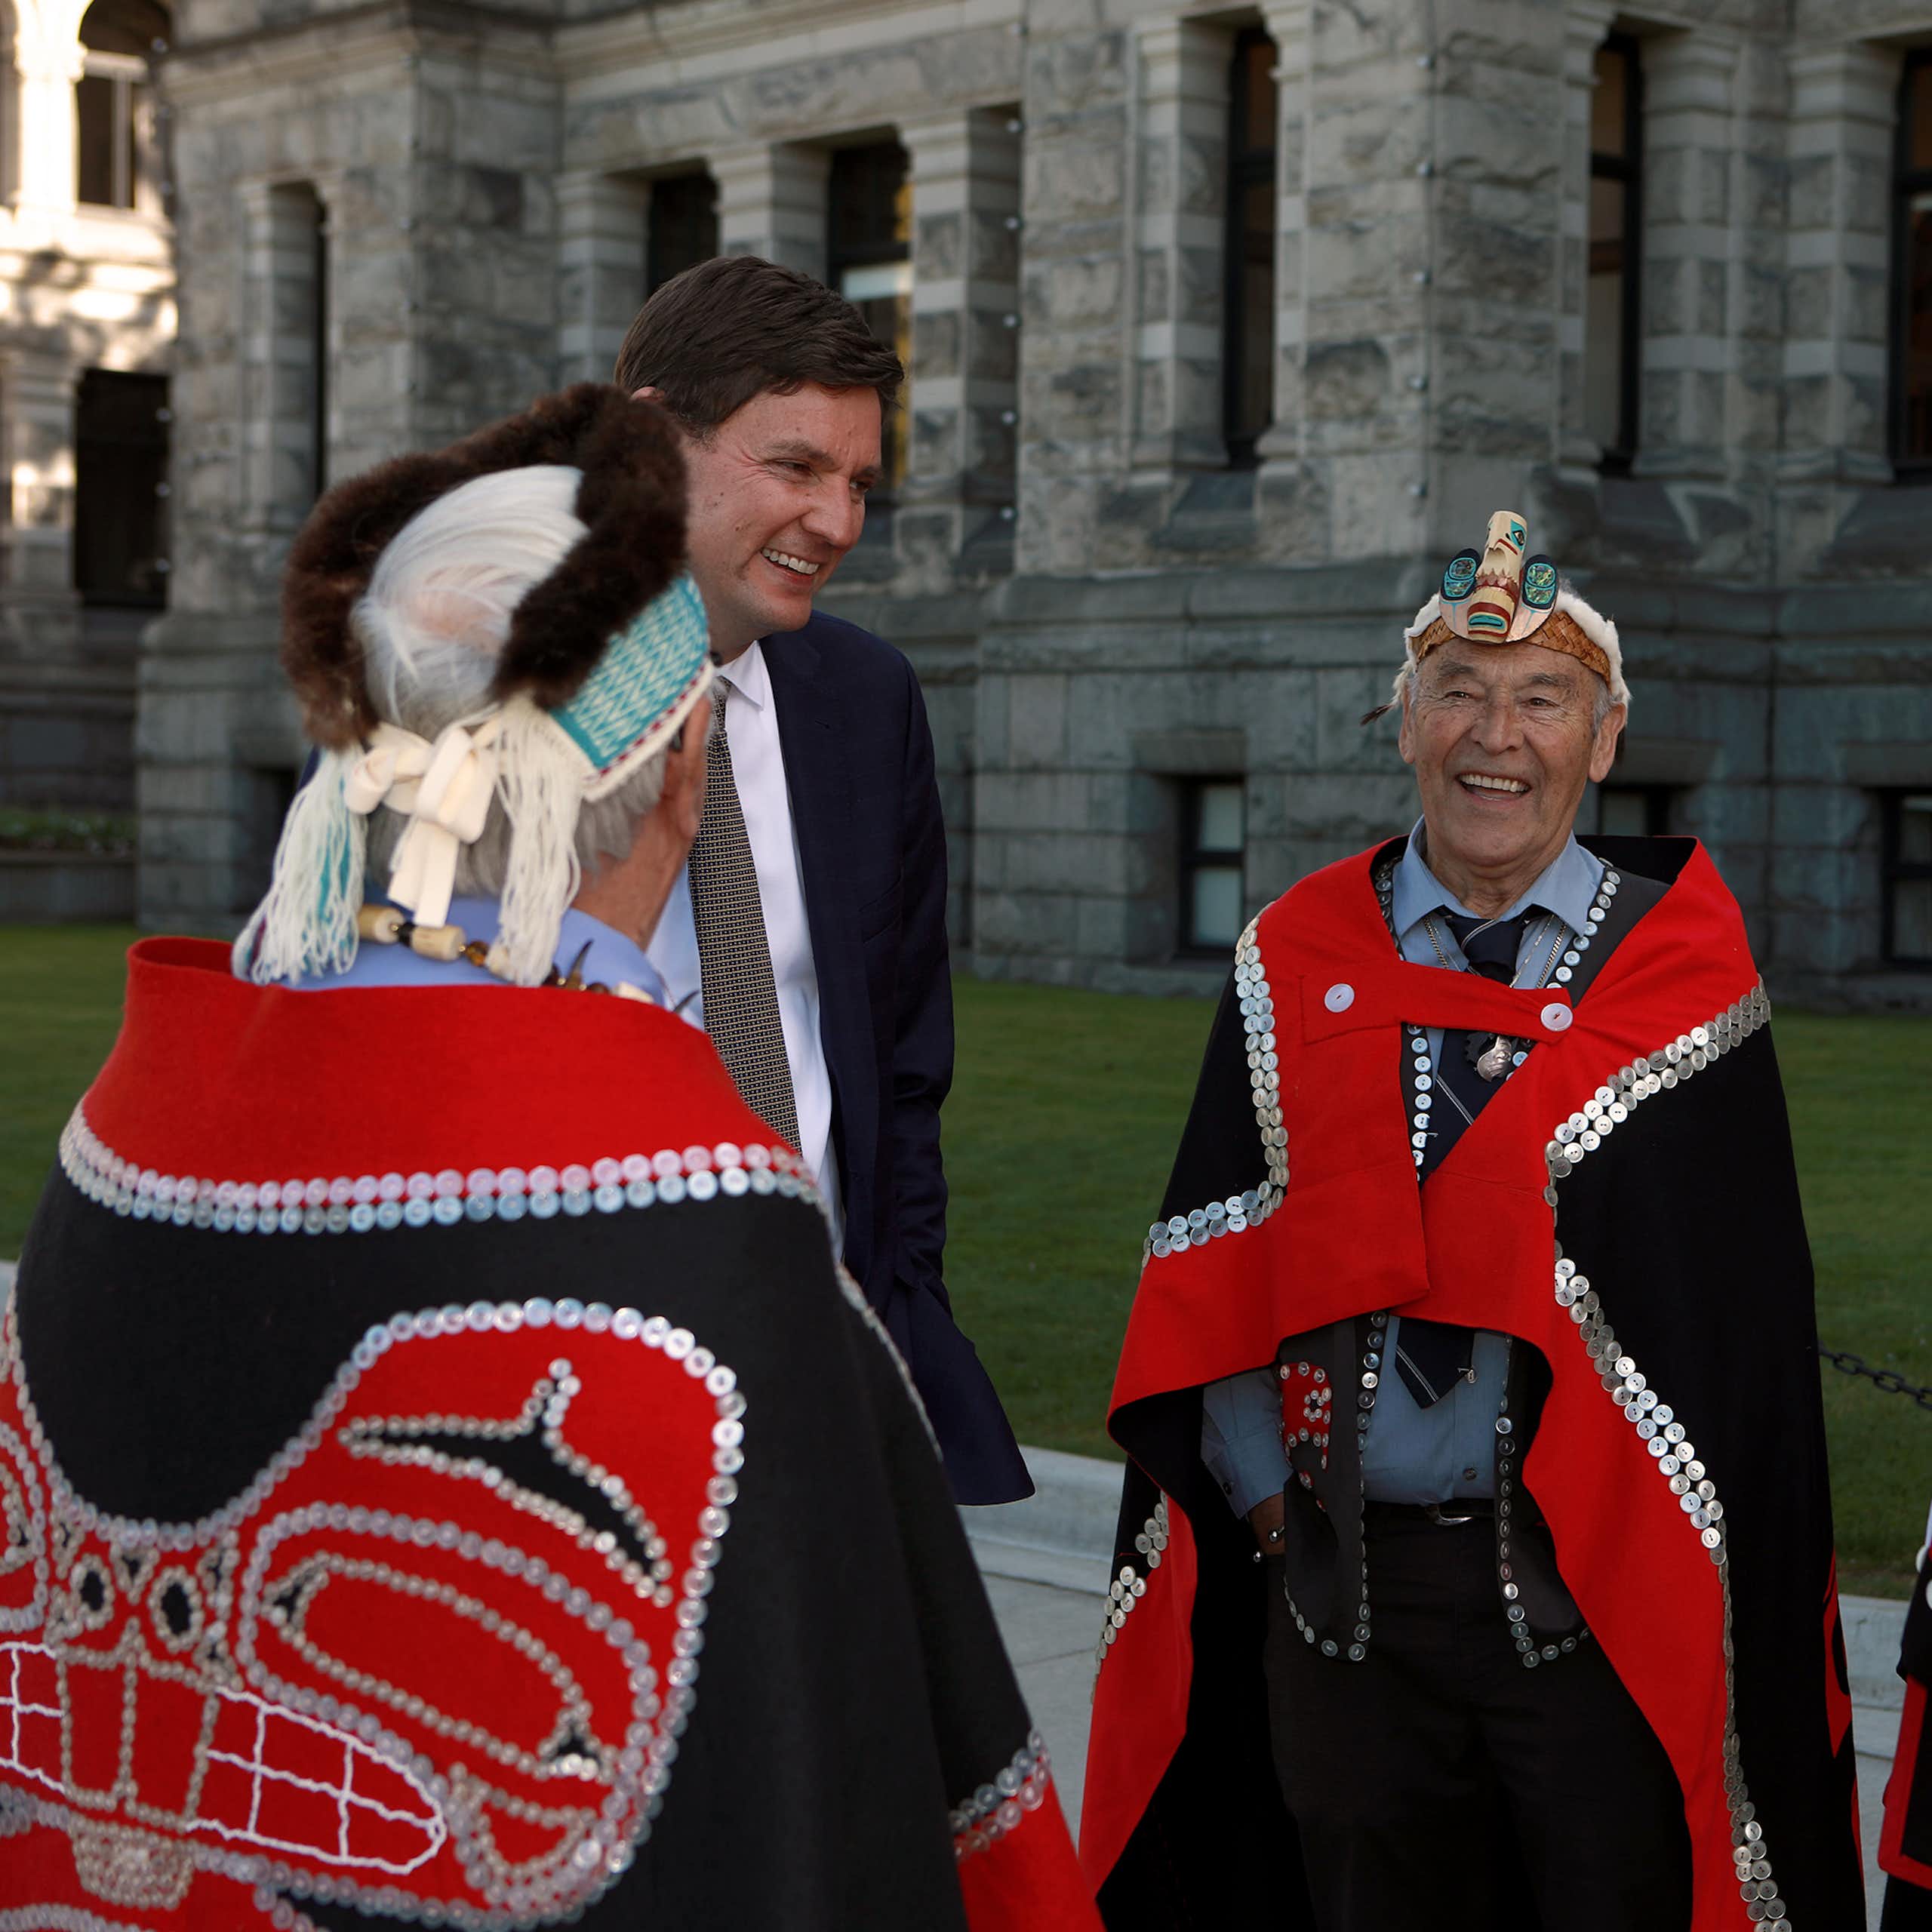 Historic Haida Nation agreement shows the world how to uphold Indigenous rights